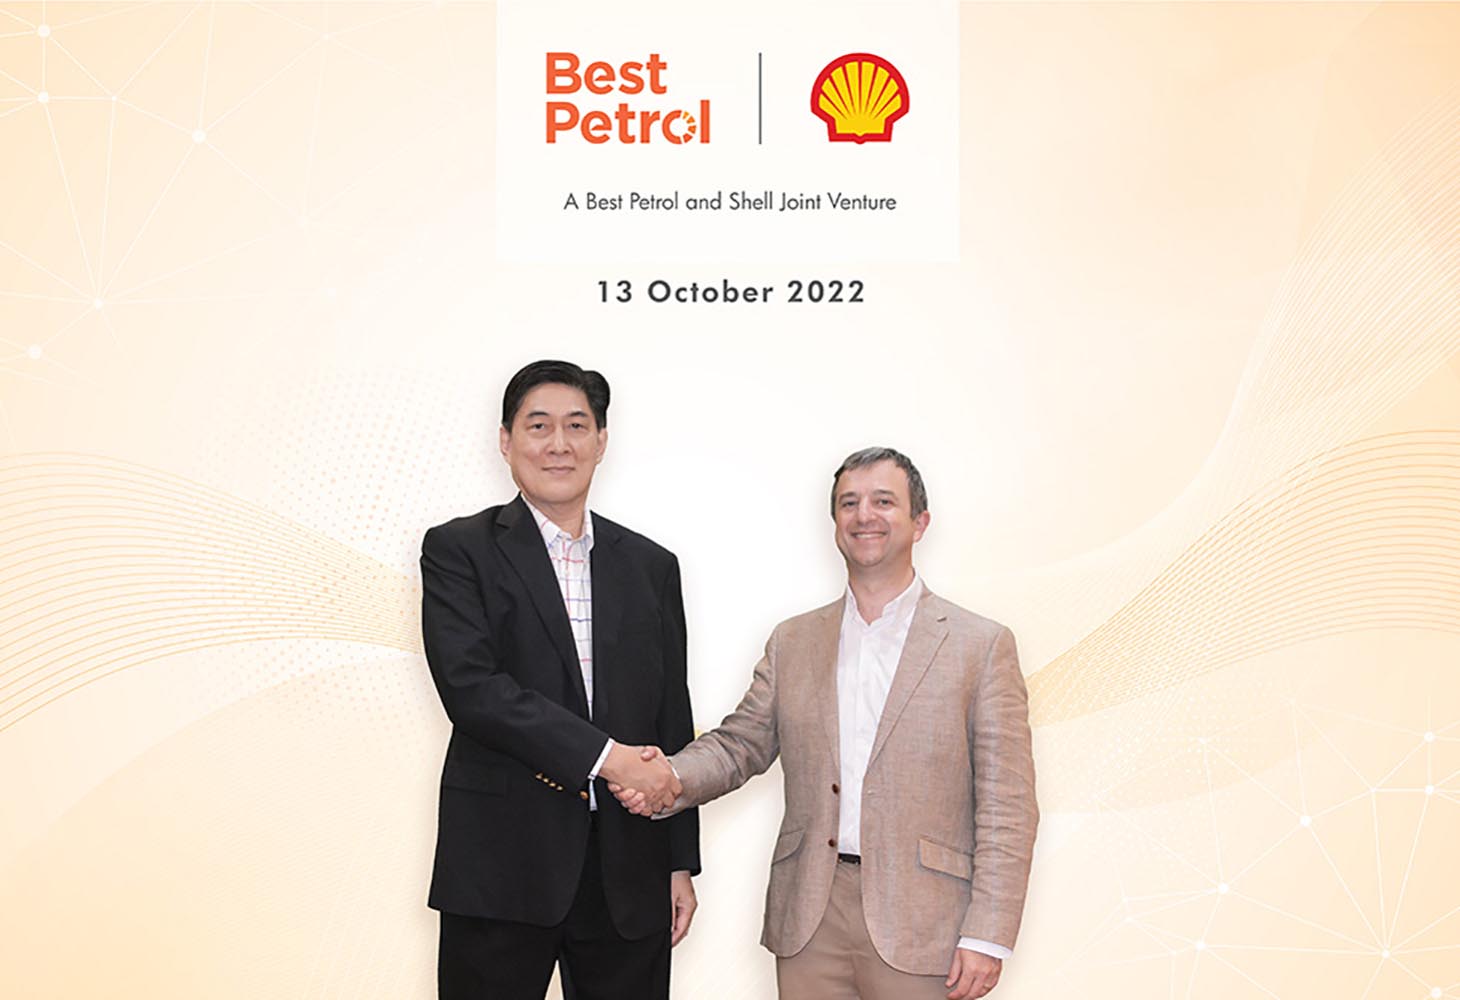 Shell Eastern to form JV with Best Petrol in Singapore